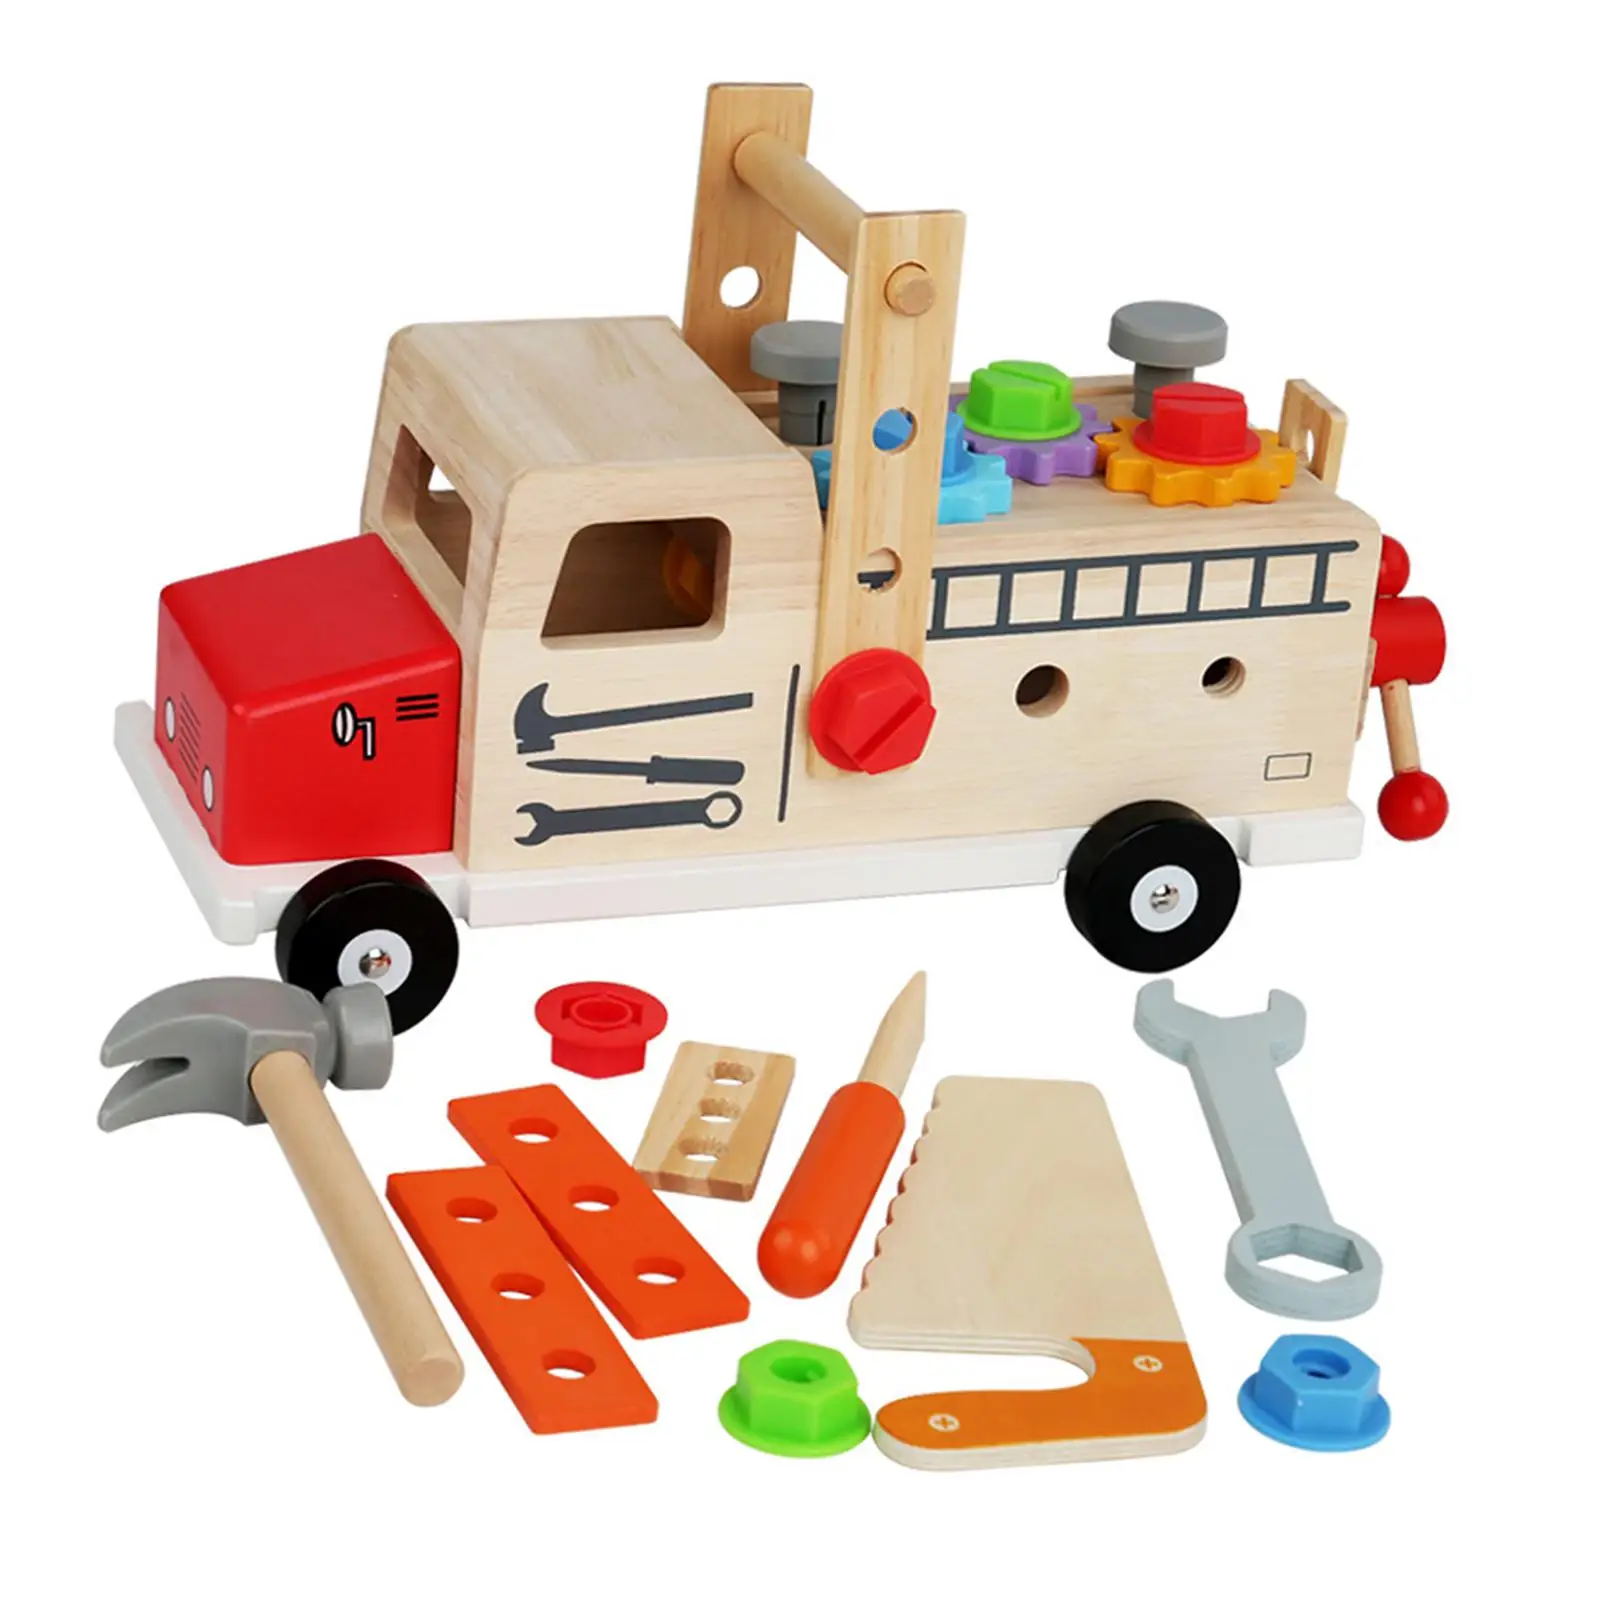 Construction Toy Wood Kids Tool Set Kids Tool Screwing Assembly Carpenter Toy for Boys Girls Age 3+ Kids Children Xmas Present